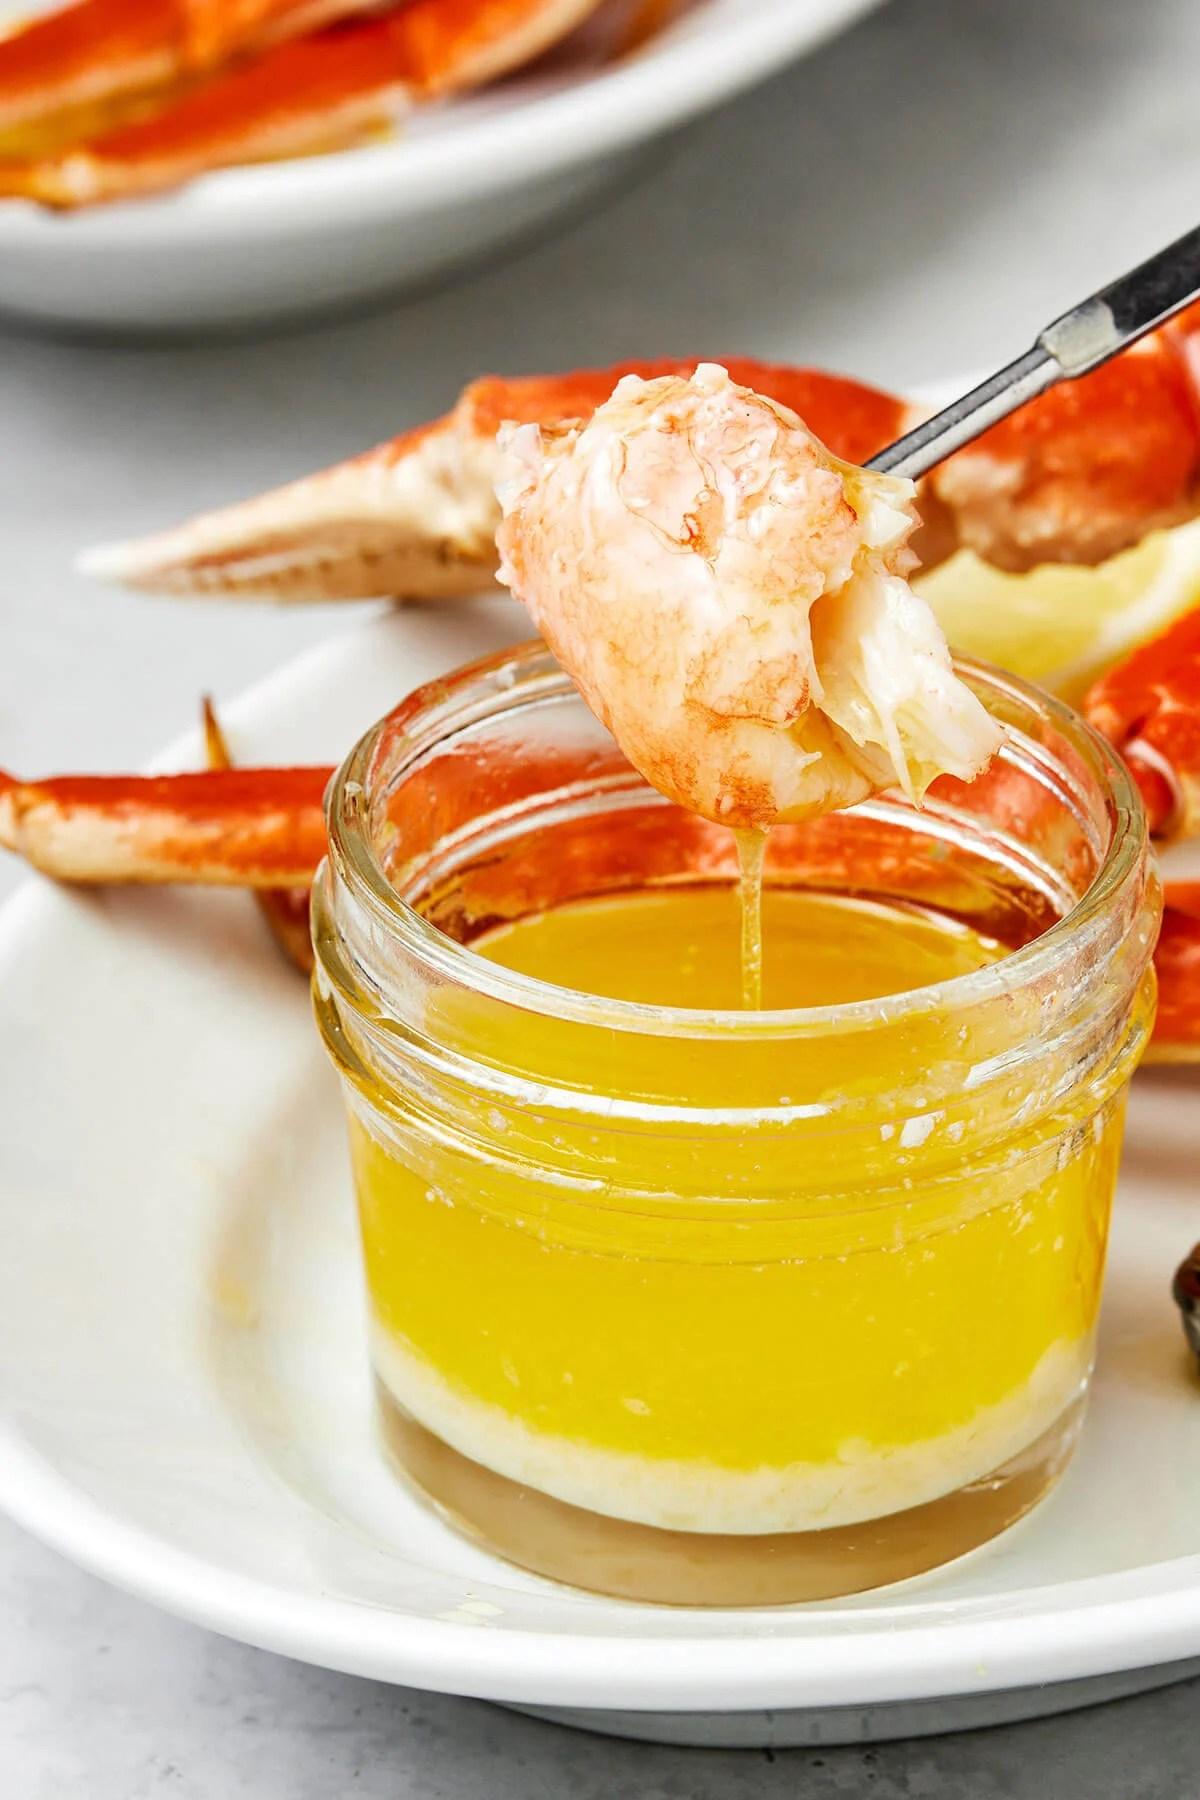 Dipping crab in butter sauce